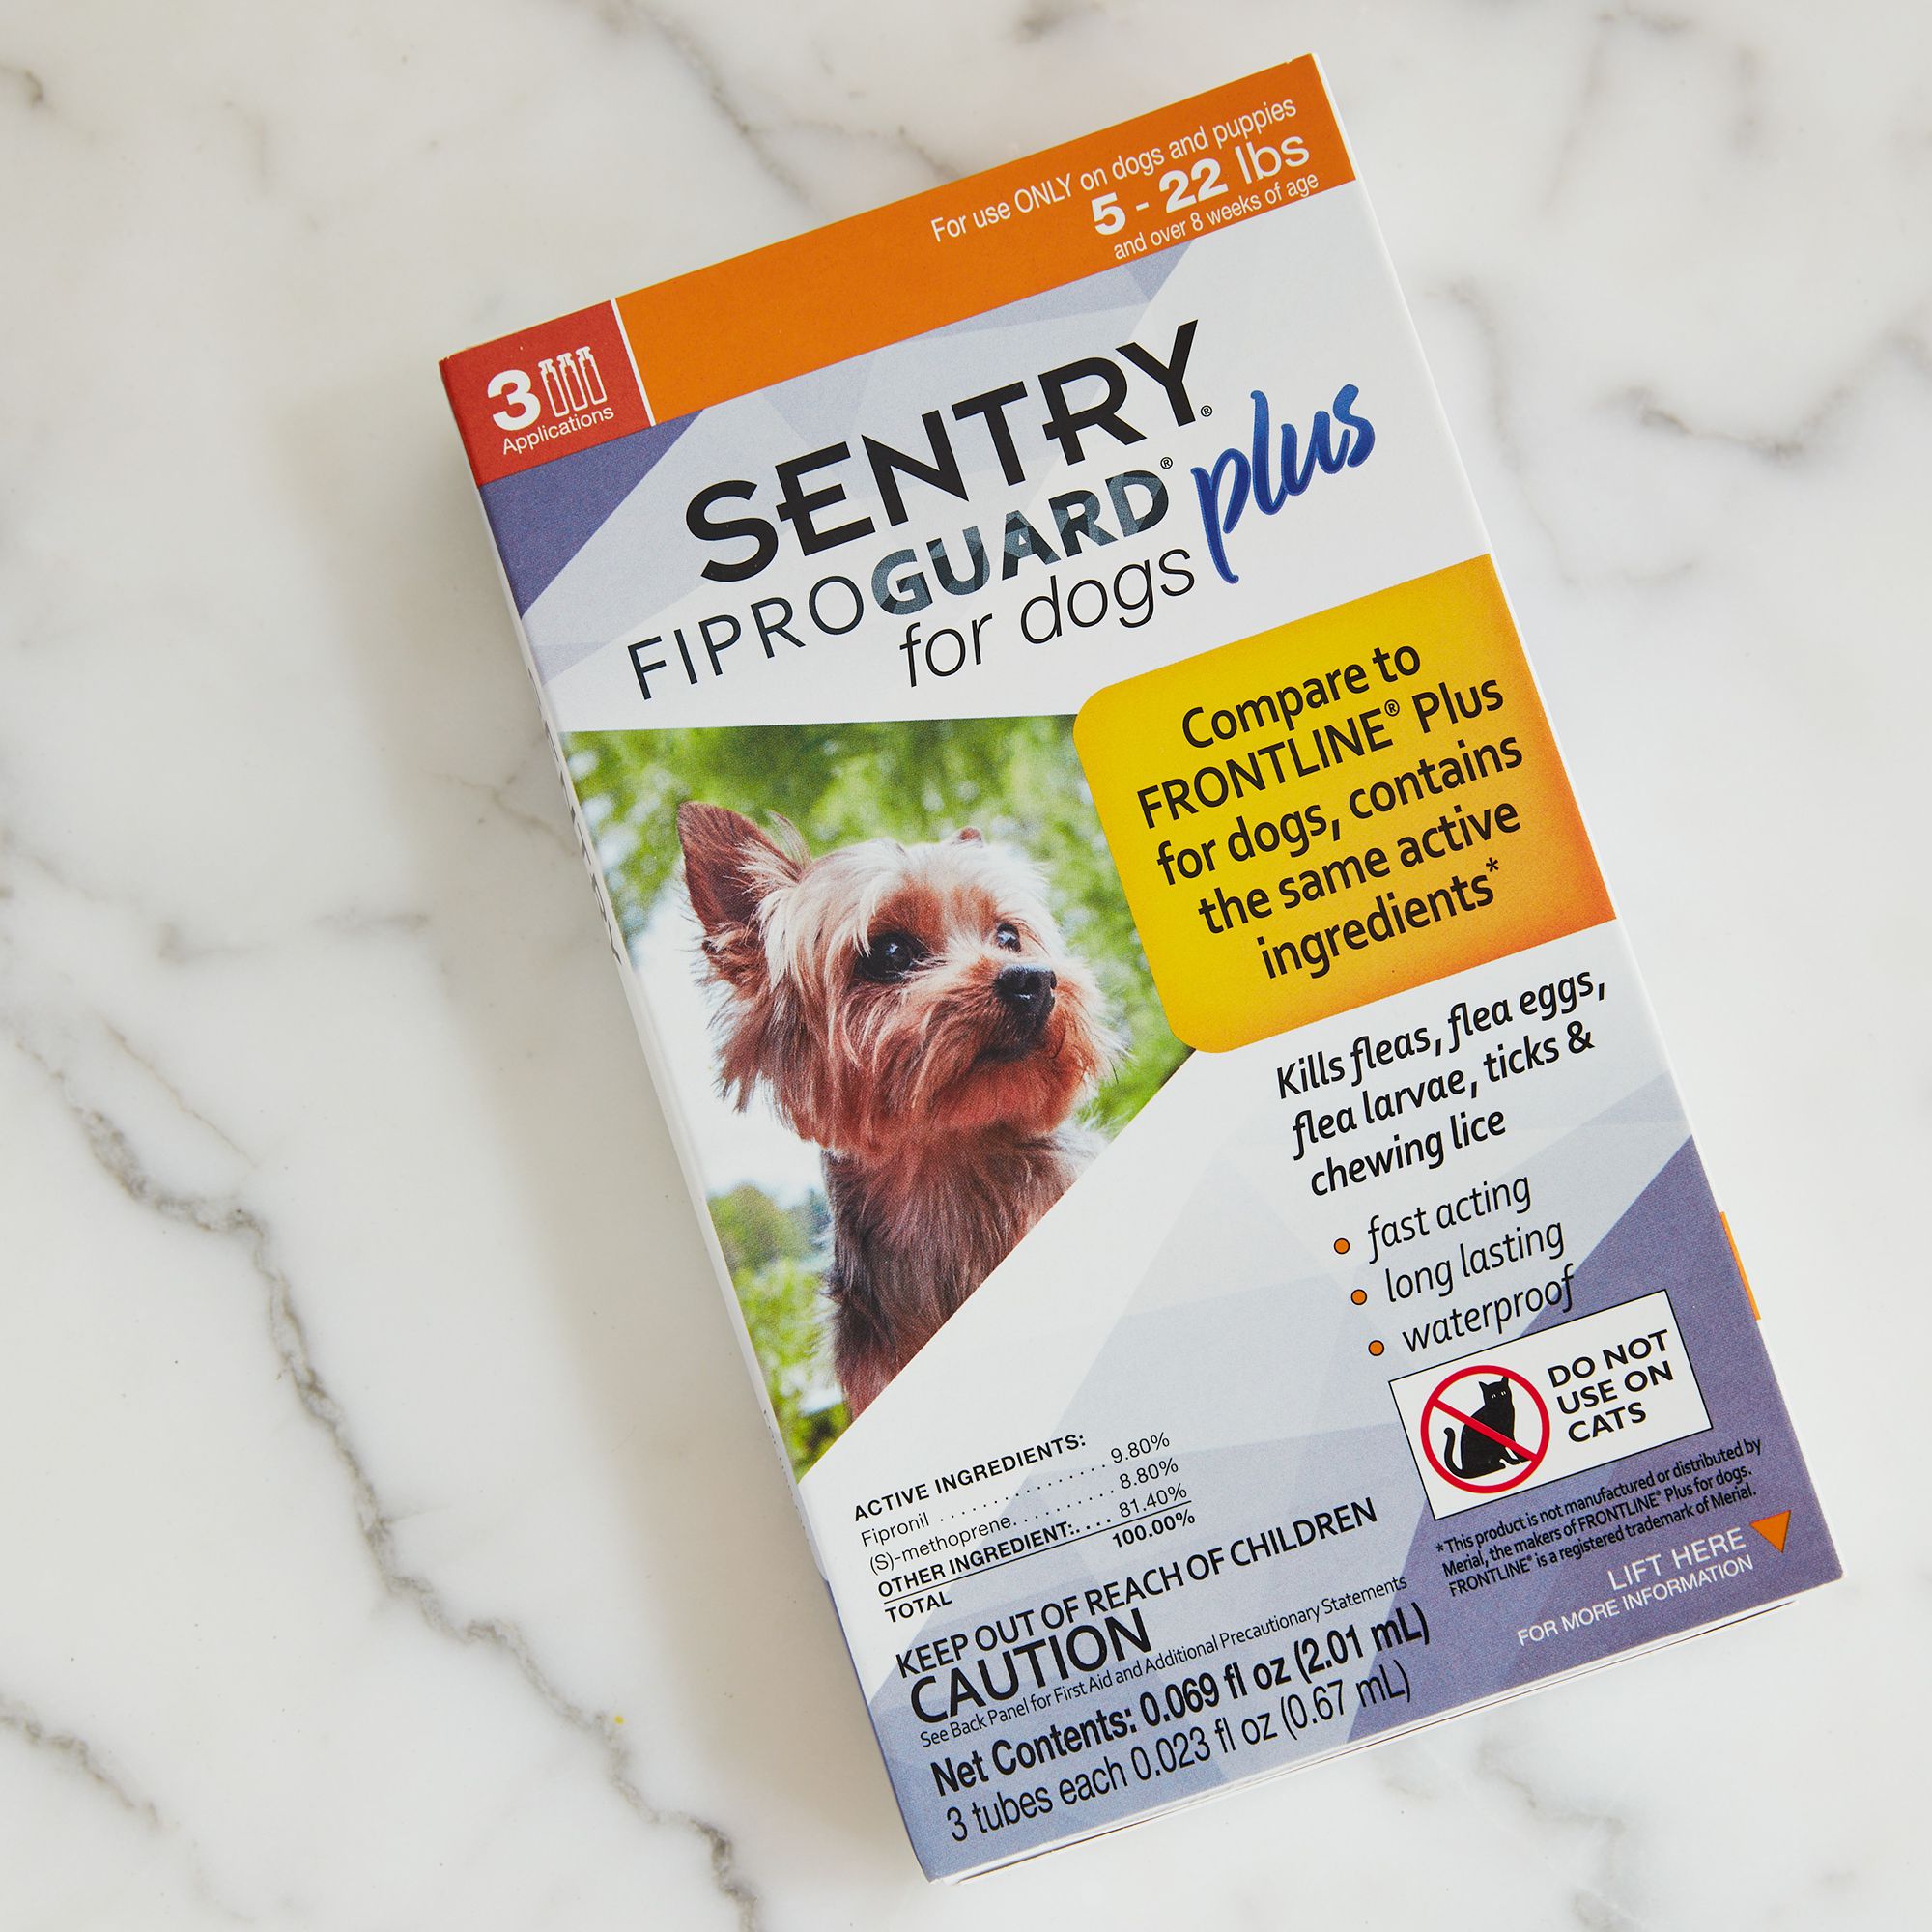 What is the least toxic flea medicine for dogs?